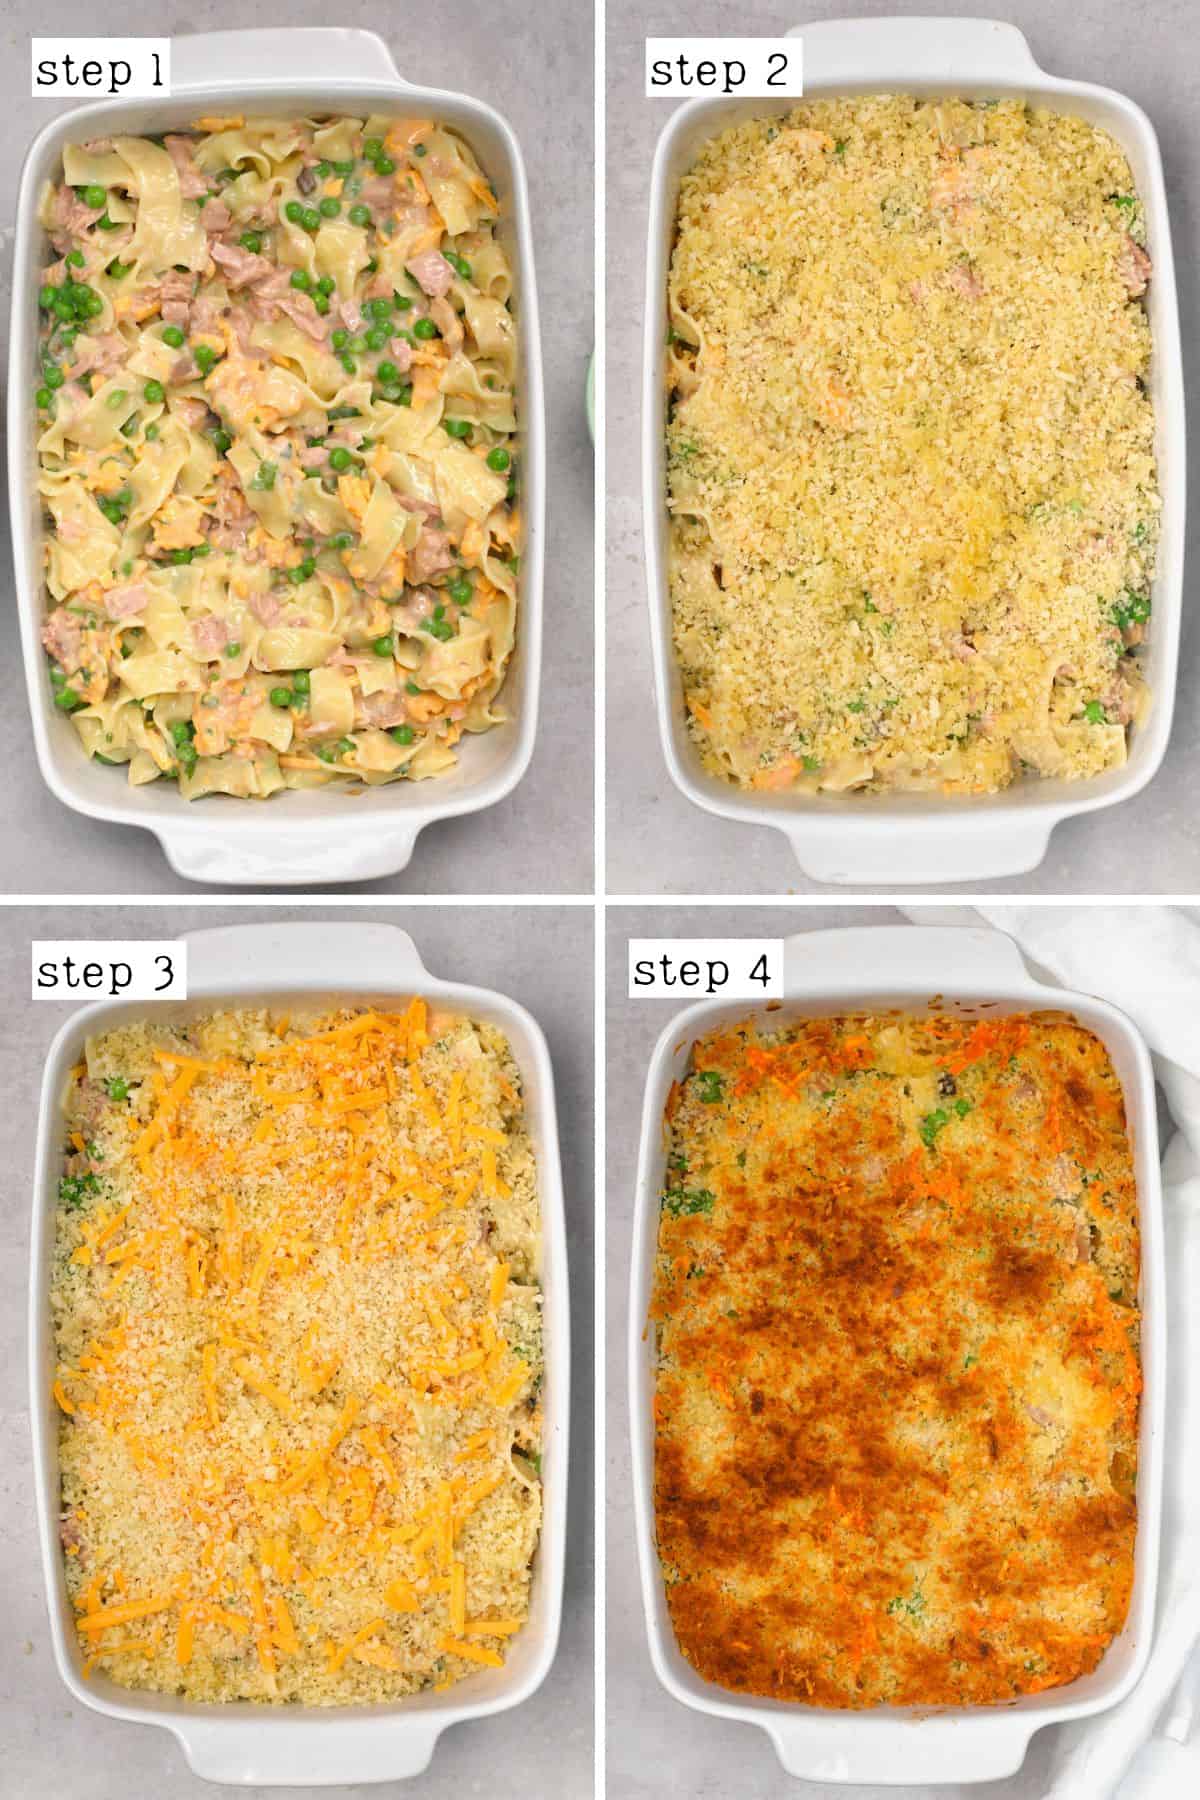 Steps for cooking tuna casserole